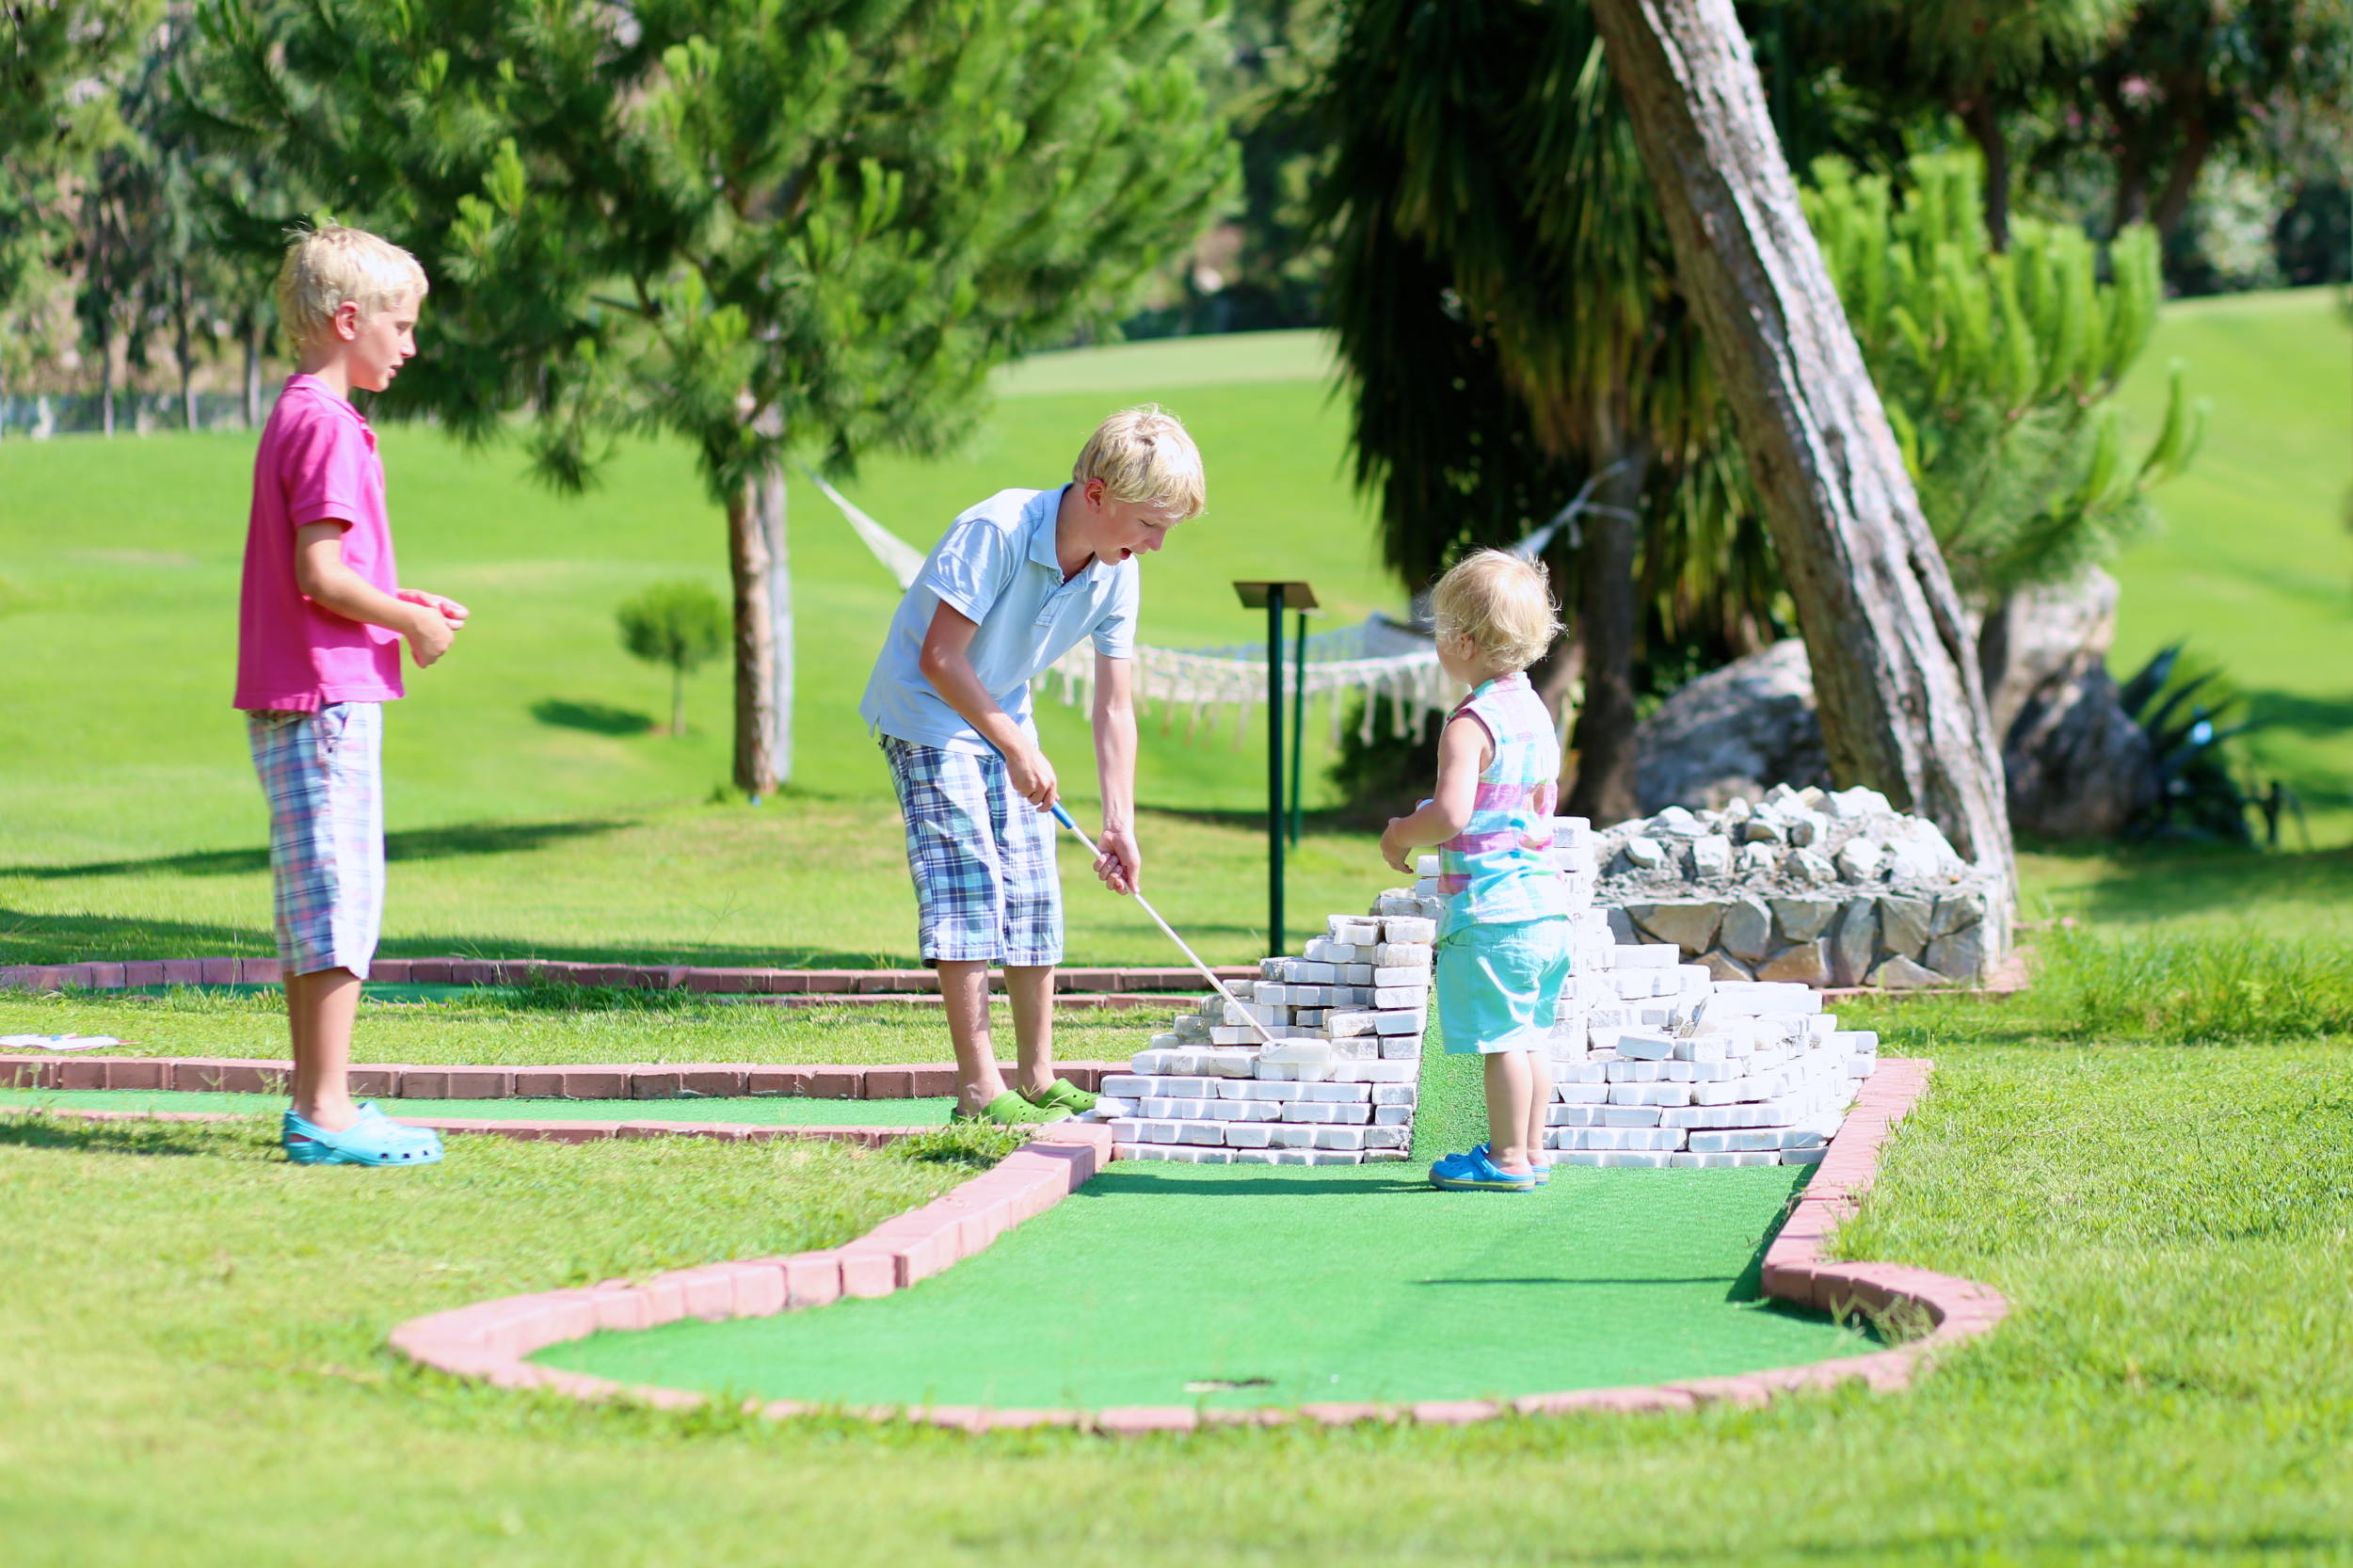 Create a mini golf tournament for your middle school students to create memories and raise money for their education.